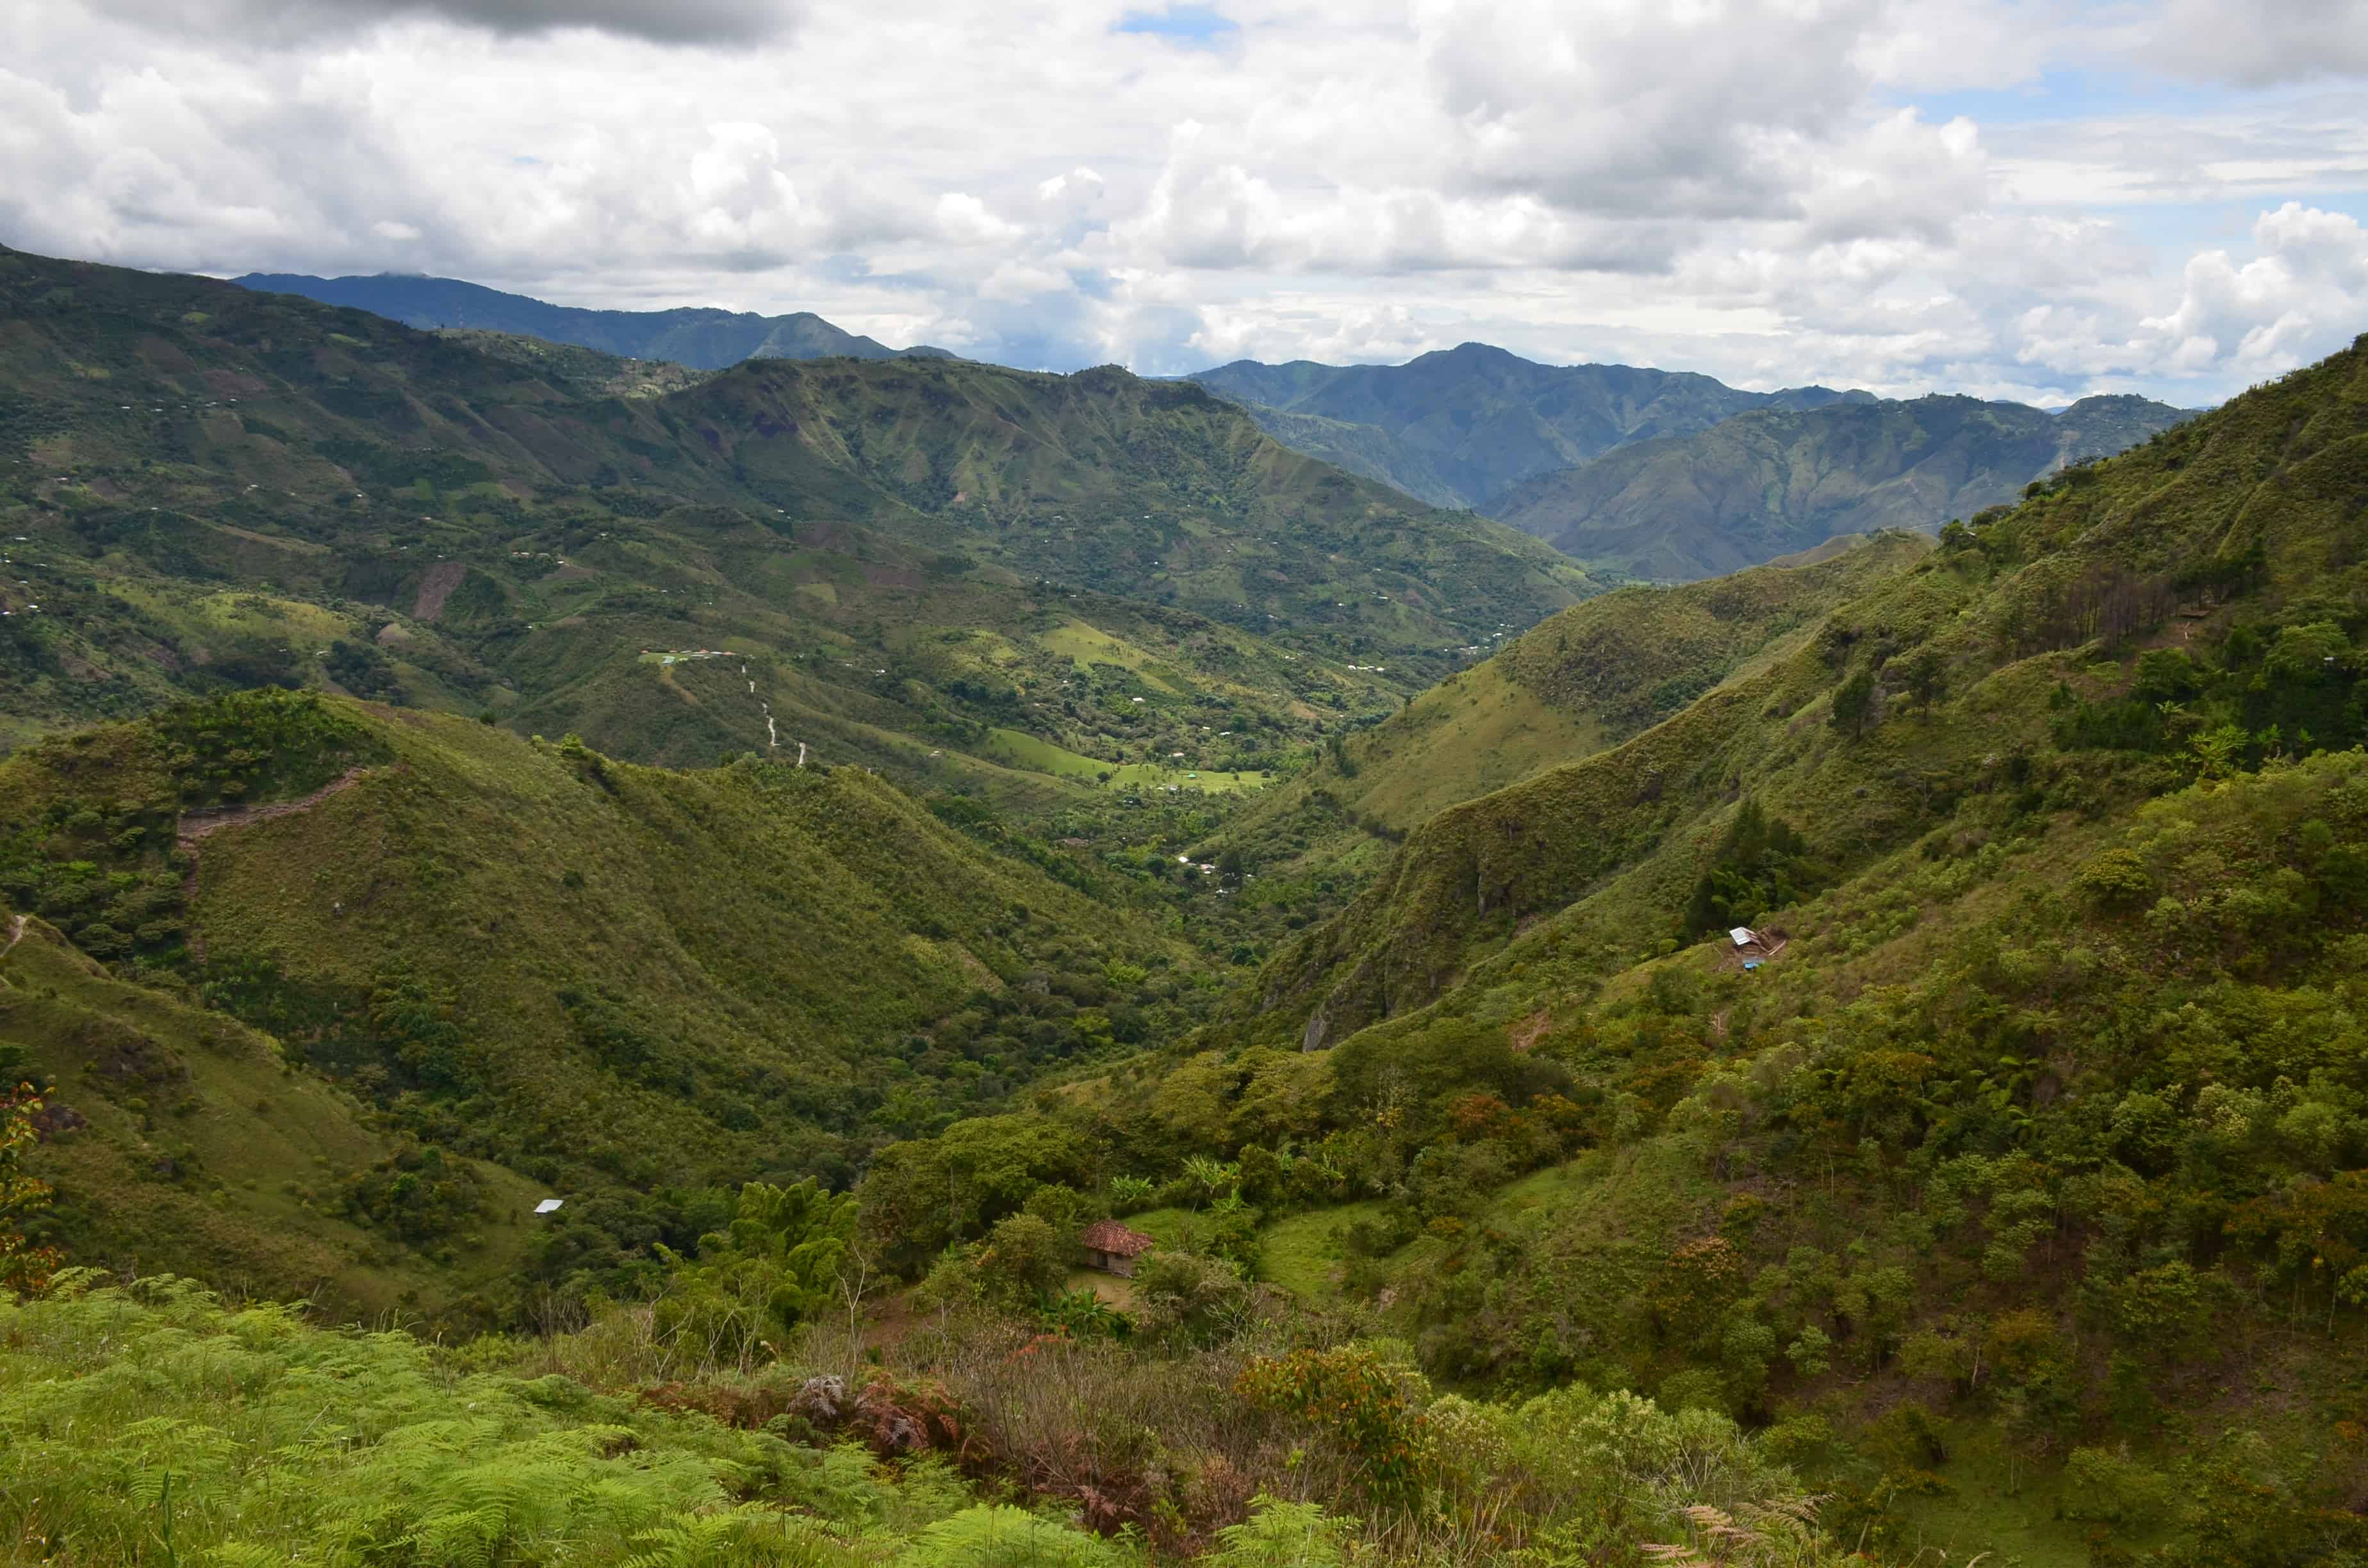 The view from the trail heading up at Tierradentro, Cauca, Colombia